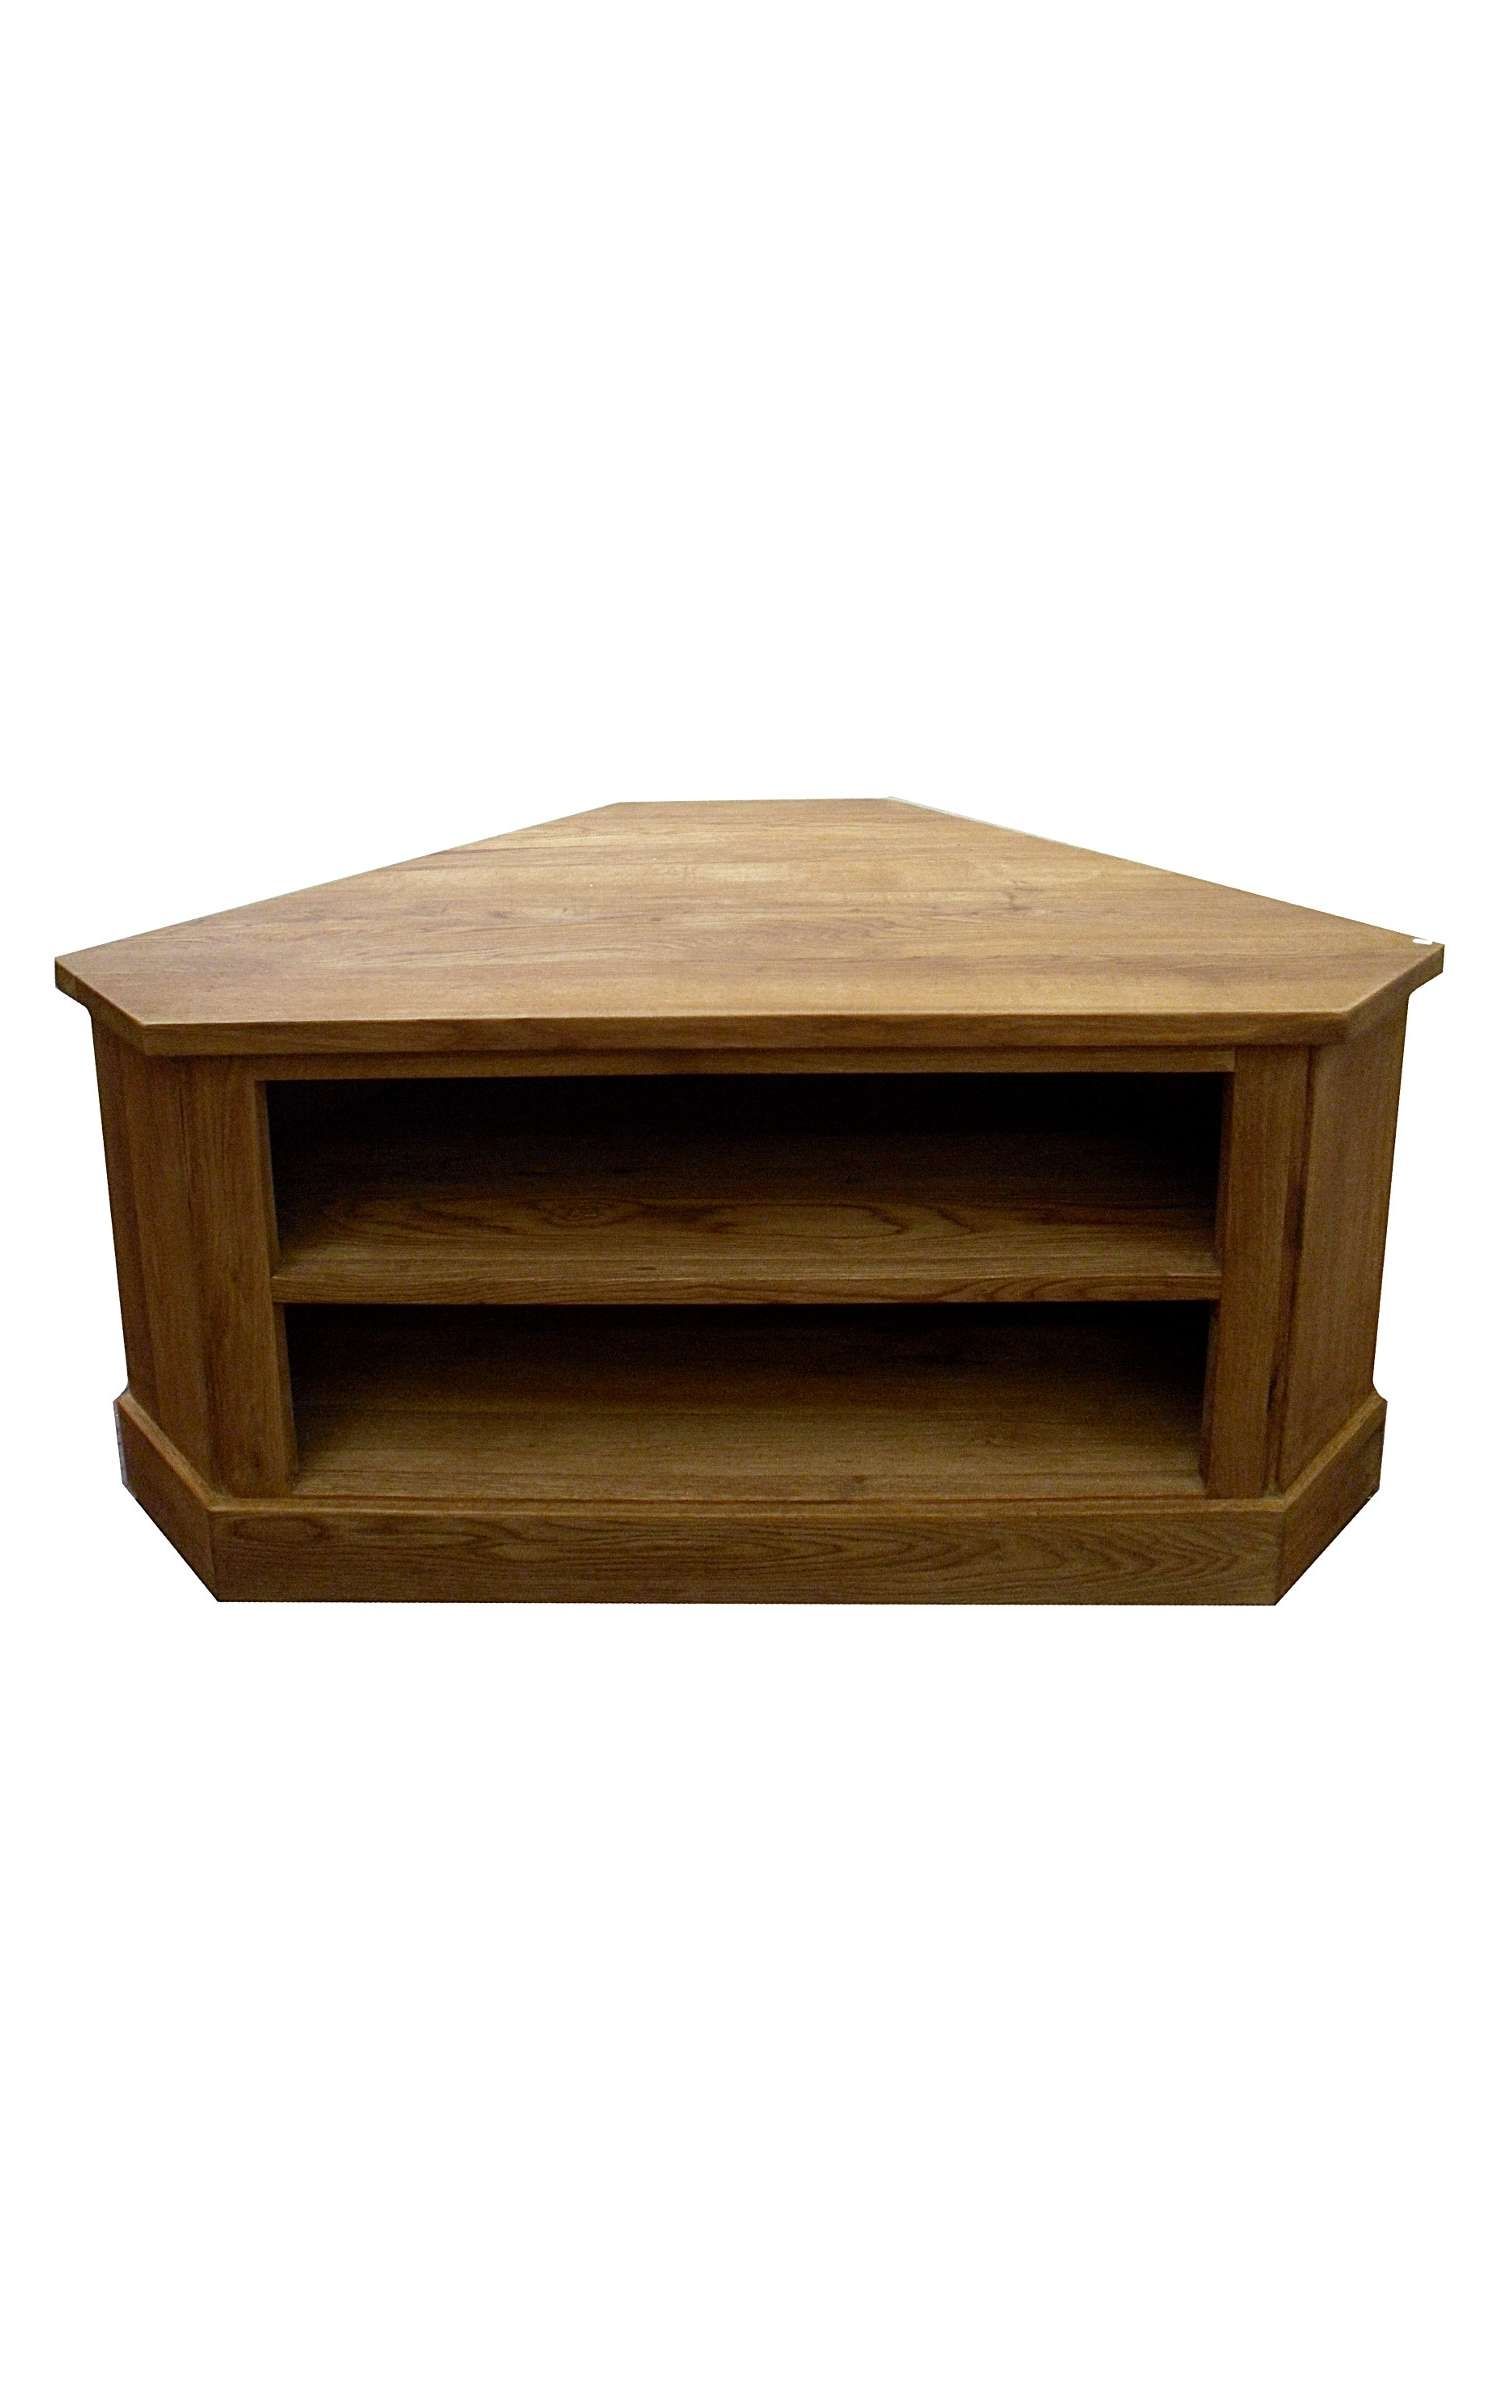 Small Wooden Corner Tv Stand Console Cabinet With Fireplace And Inside Small Oak Corner Tv Stands (View 3 of 15)